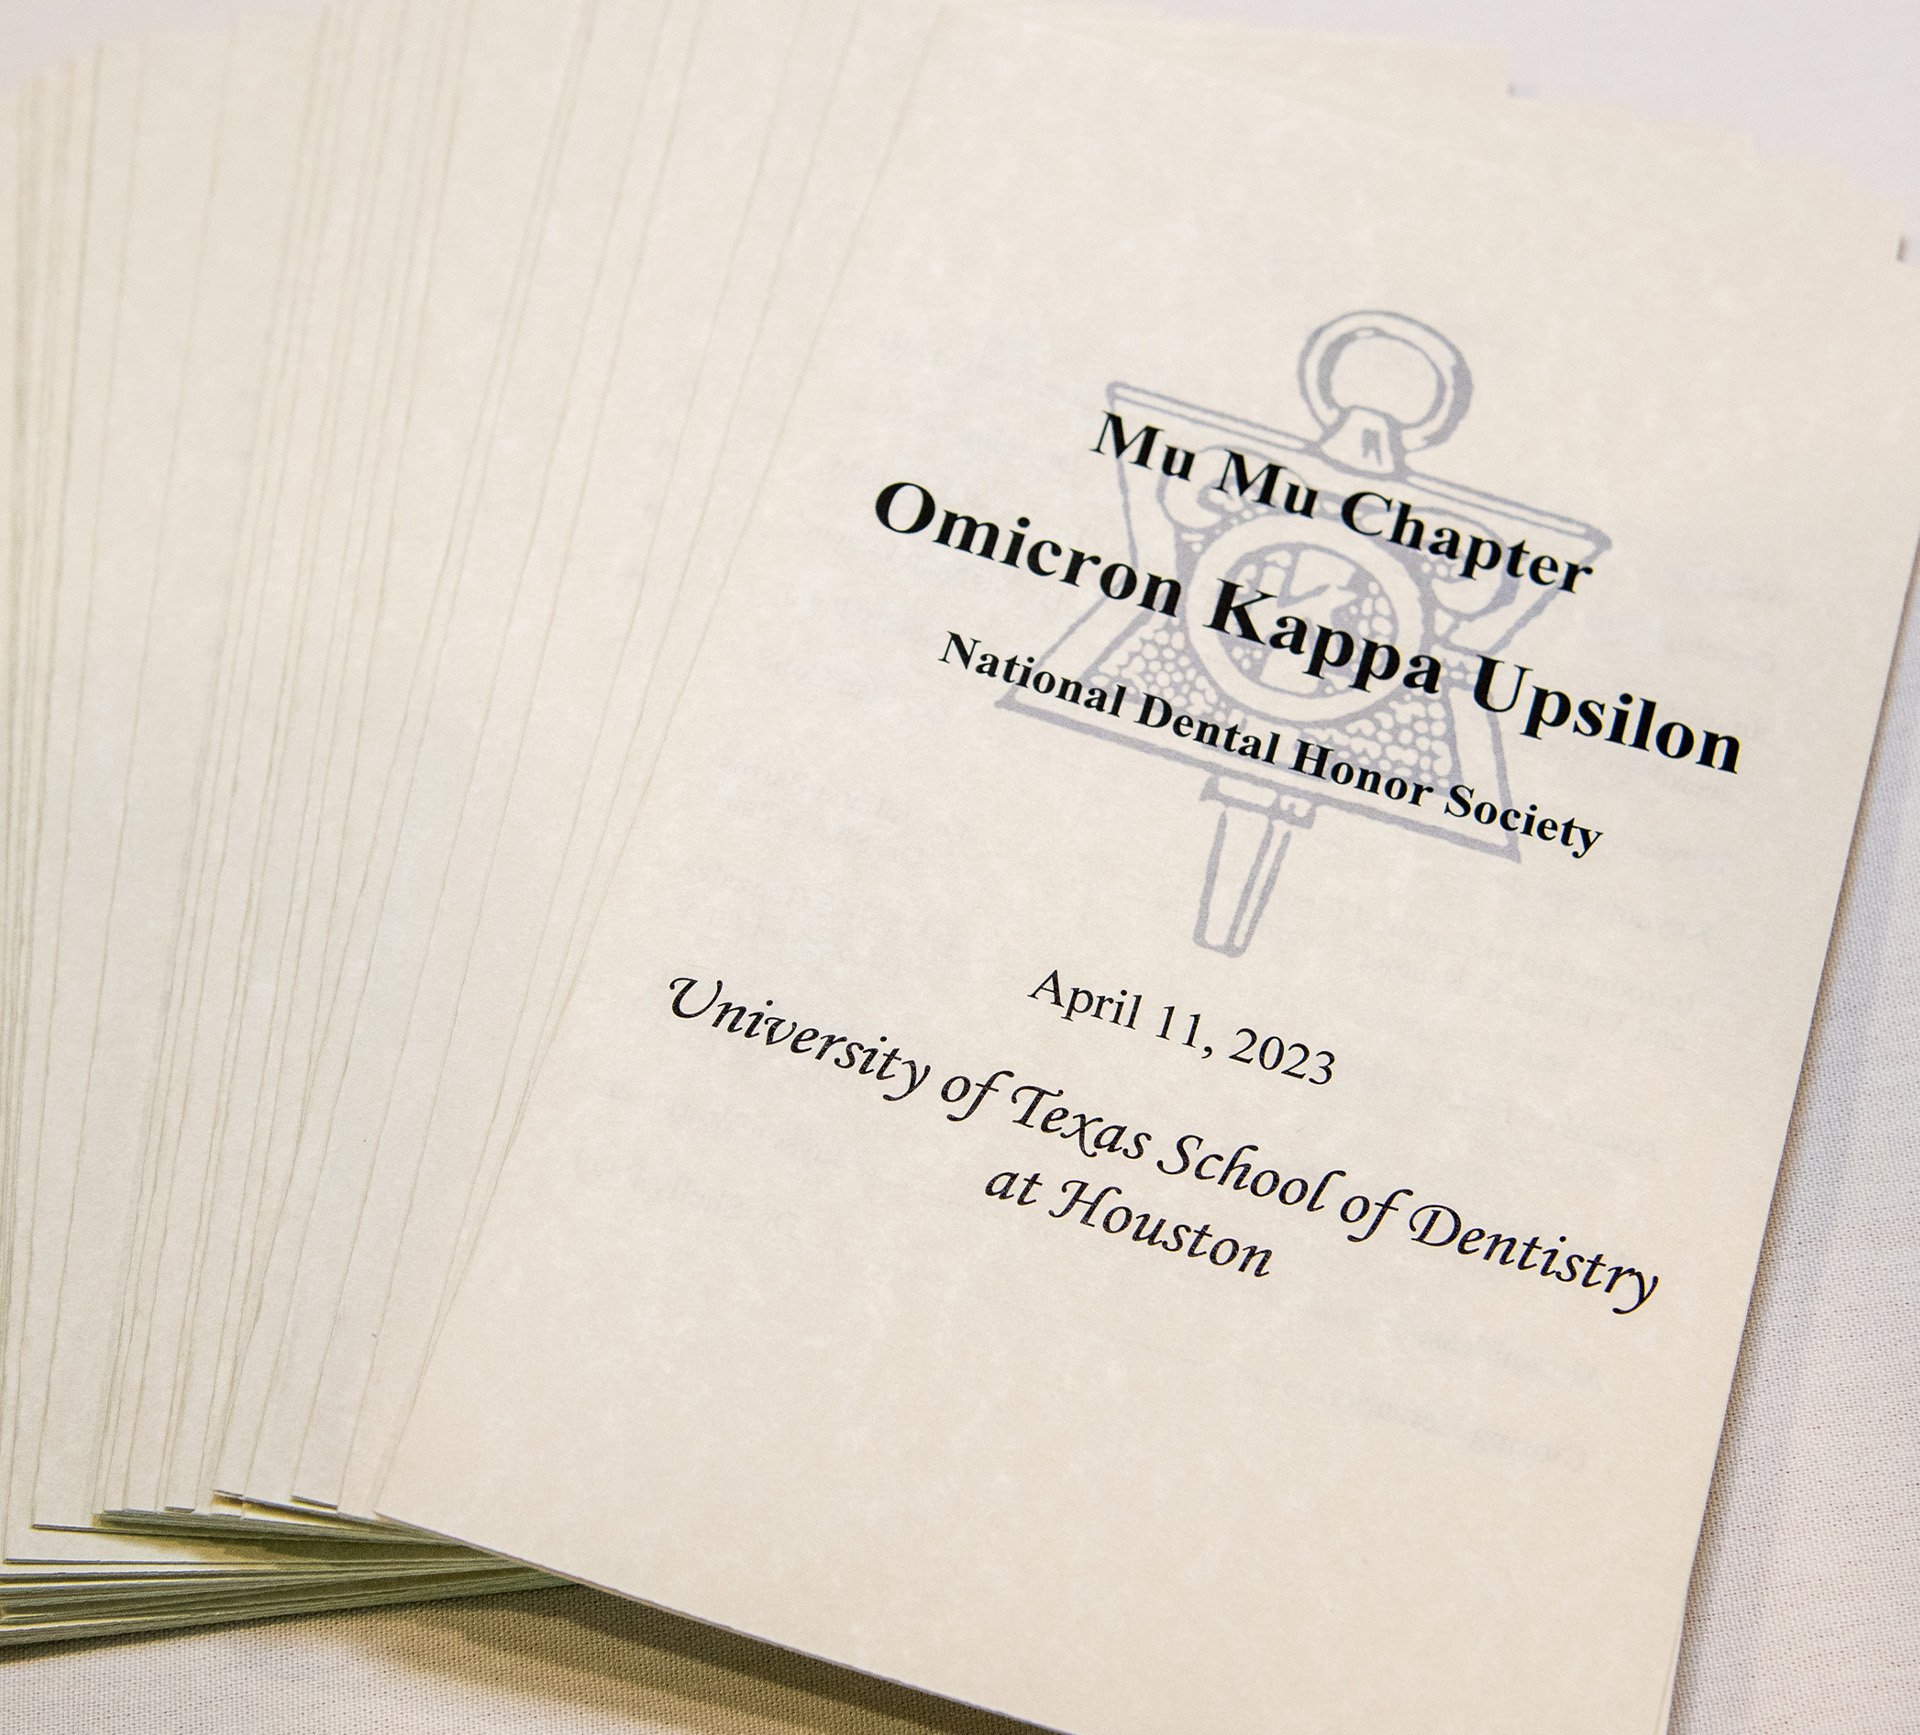 Omicron Kappa Upsilon National Dental Honor Society’s Mu Mu Chapter at UTHealth Houston School of Dentistry welcomed 12 soon-to-be graduating dental students and two faculty members in its Class of 2023.